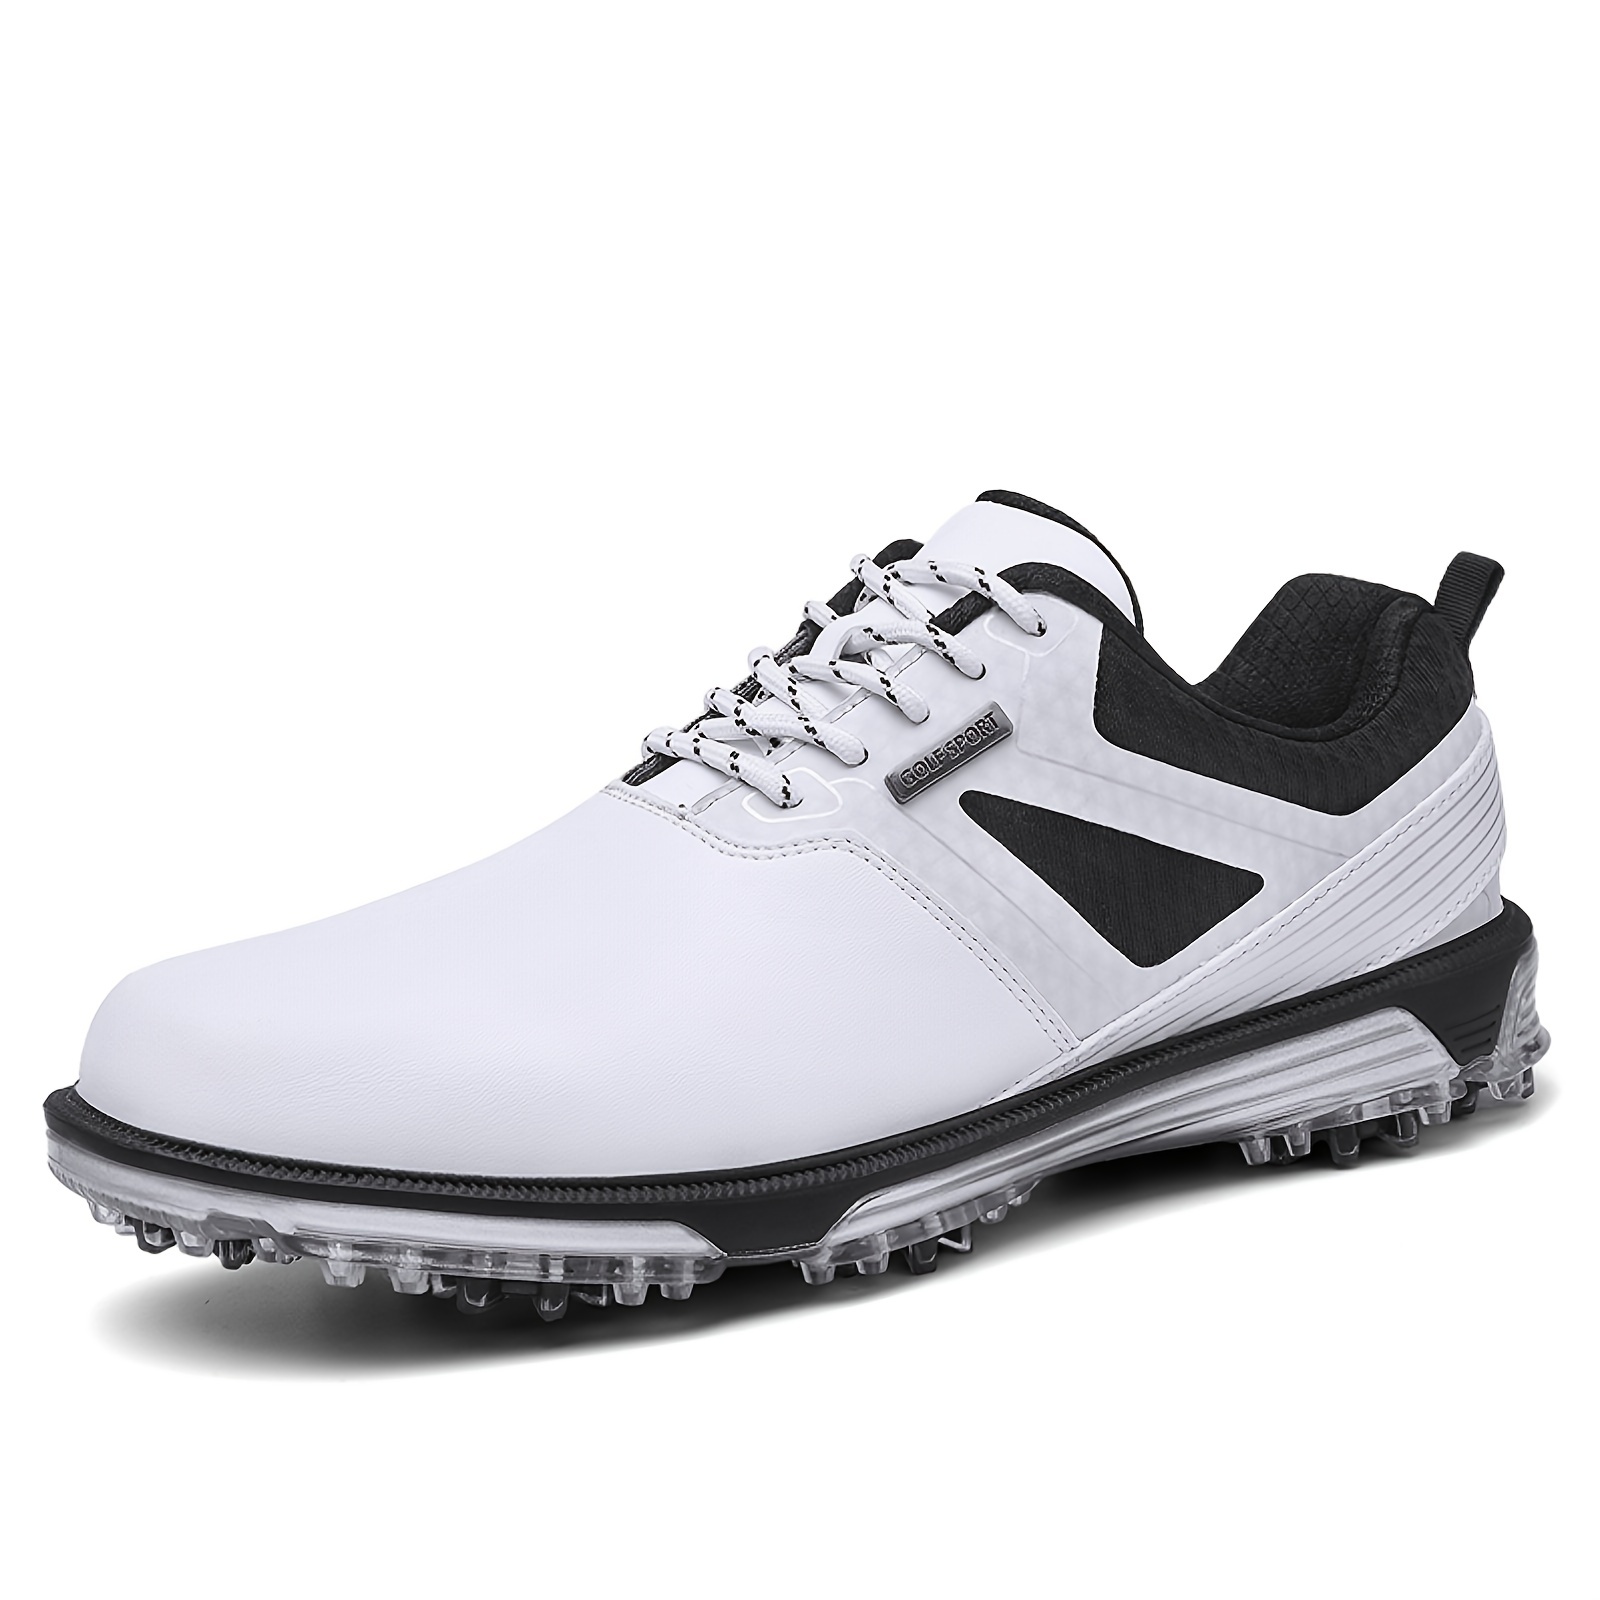 Men's Professional 9 Spikes Golf Shoes, Solid Comfy Non Slip Lace